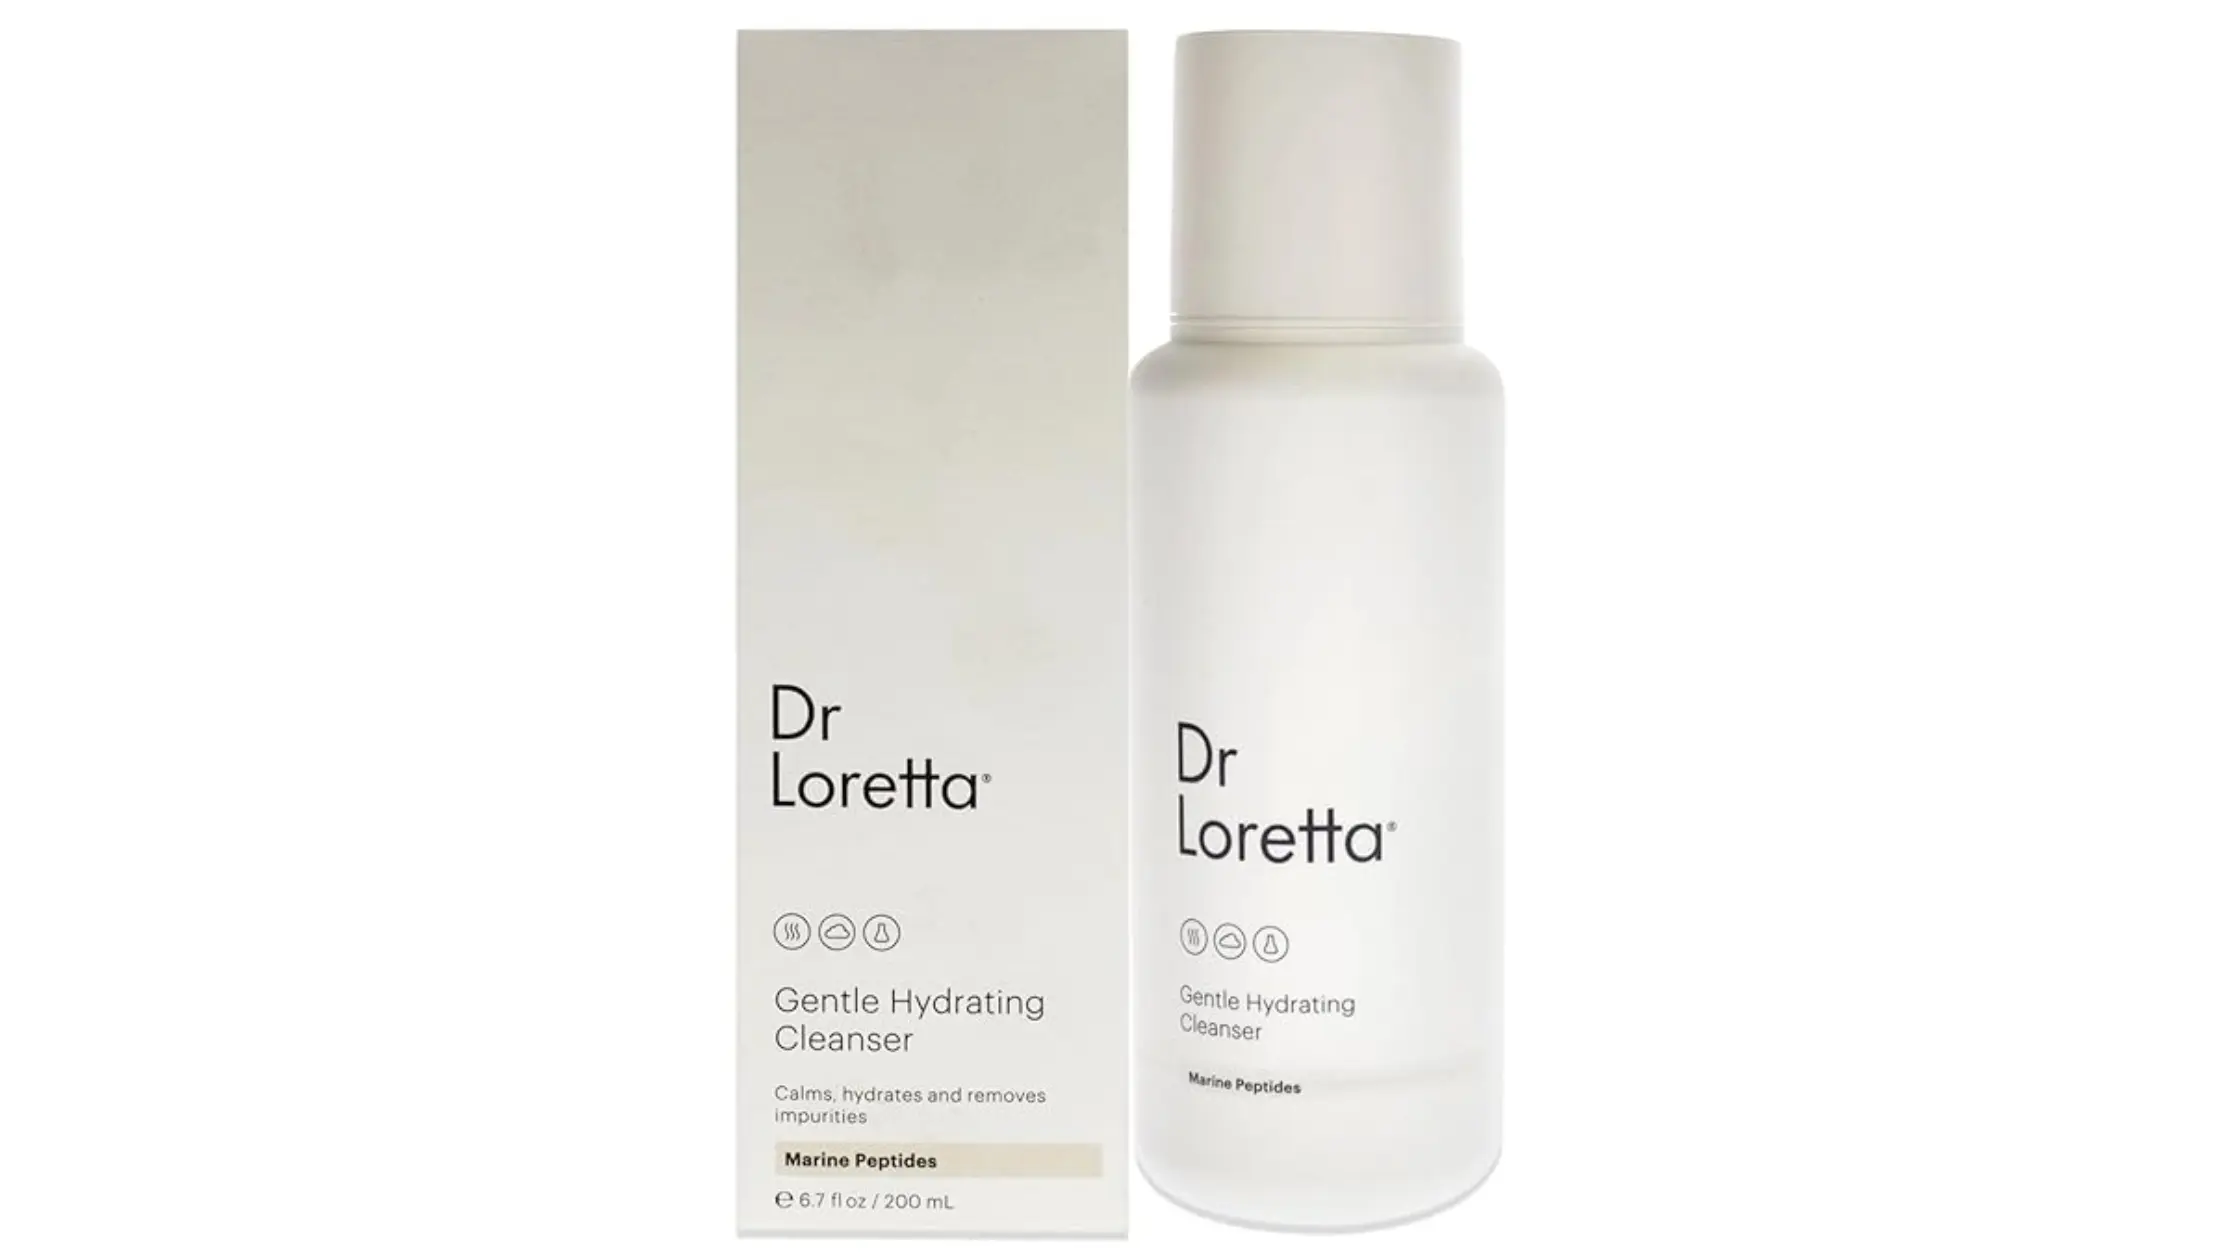 Dr. Loretta Gentle Hydrating Cleanser Review